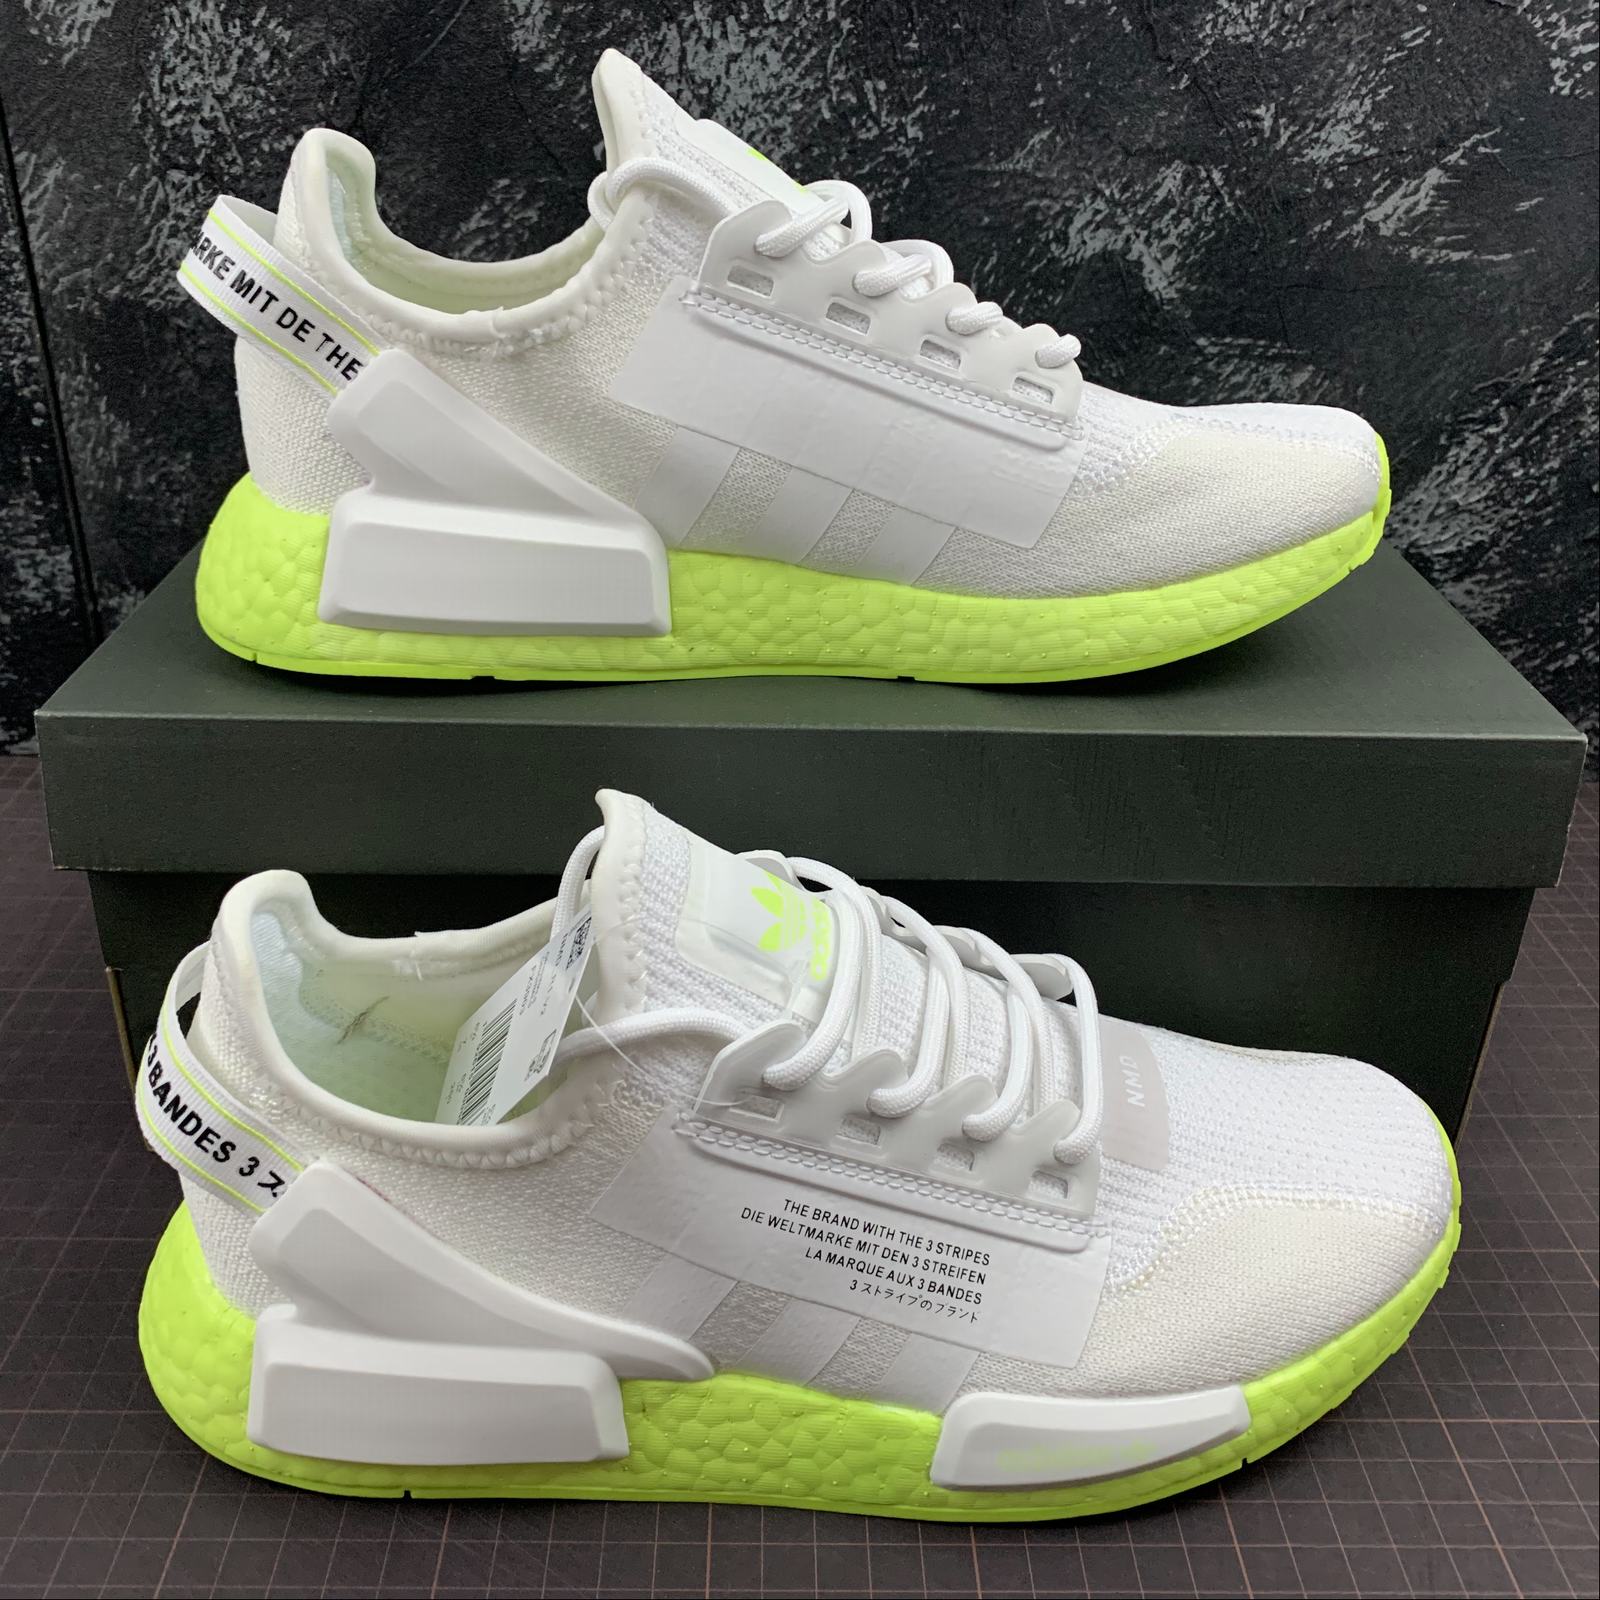 Absay embargo Rey Lear Adidas NMD R1 V2 White Solar Yellow – juanma-shop